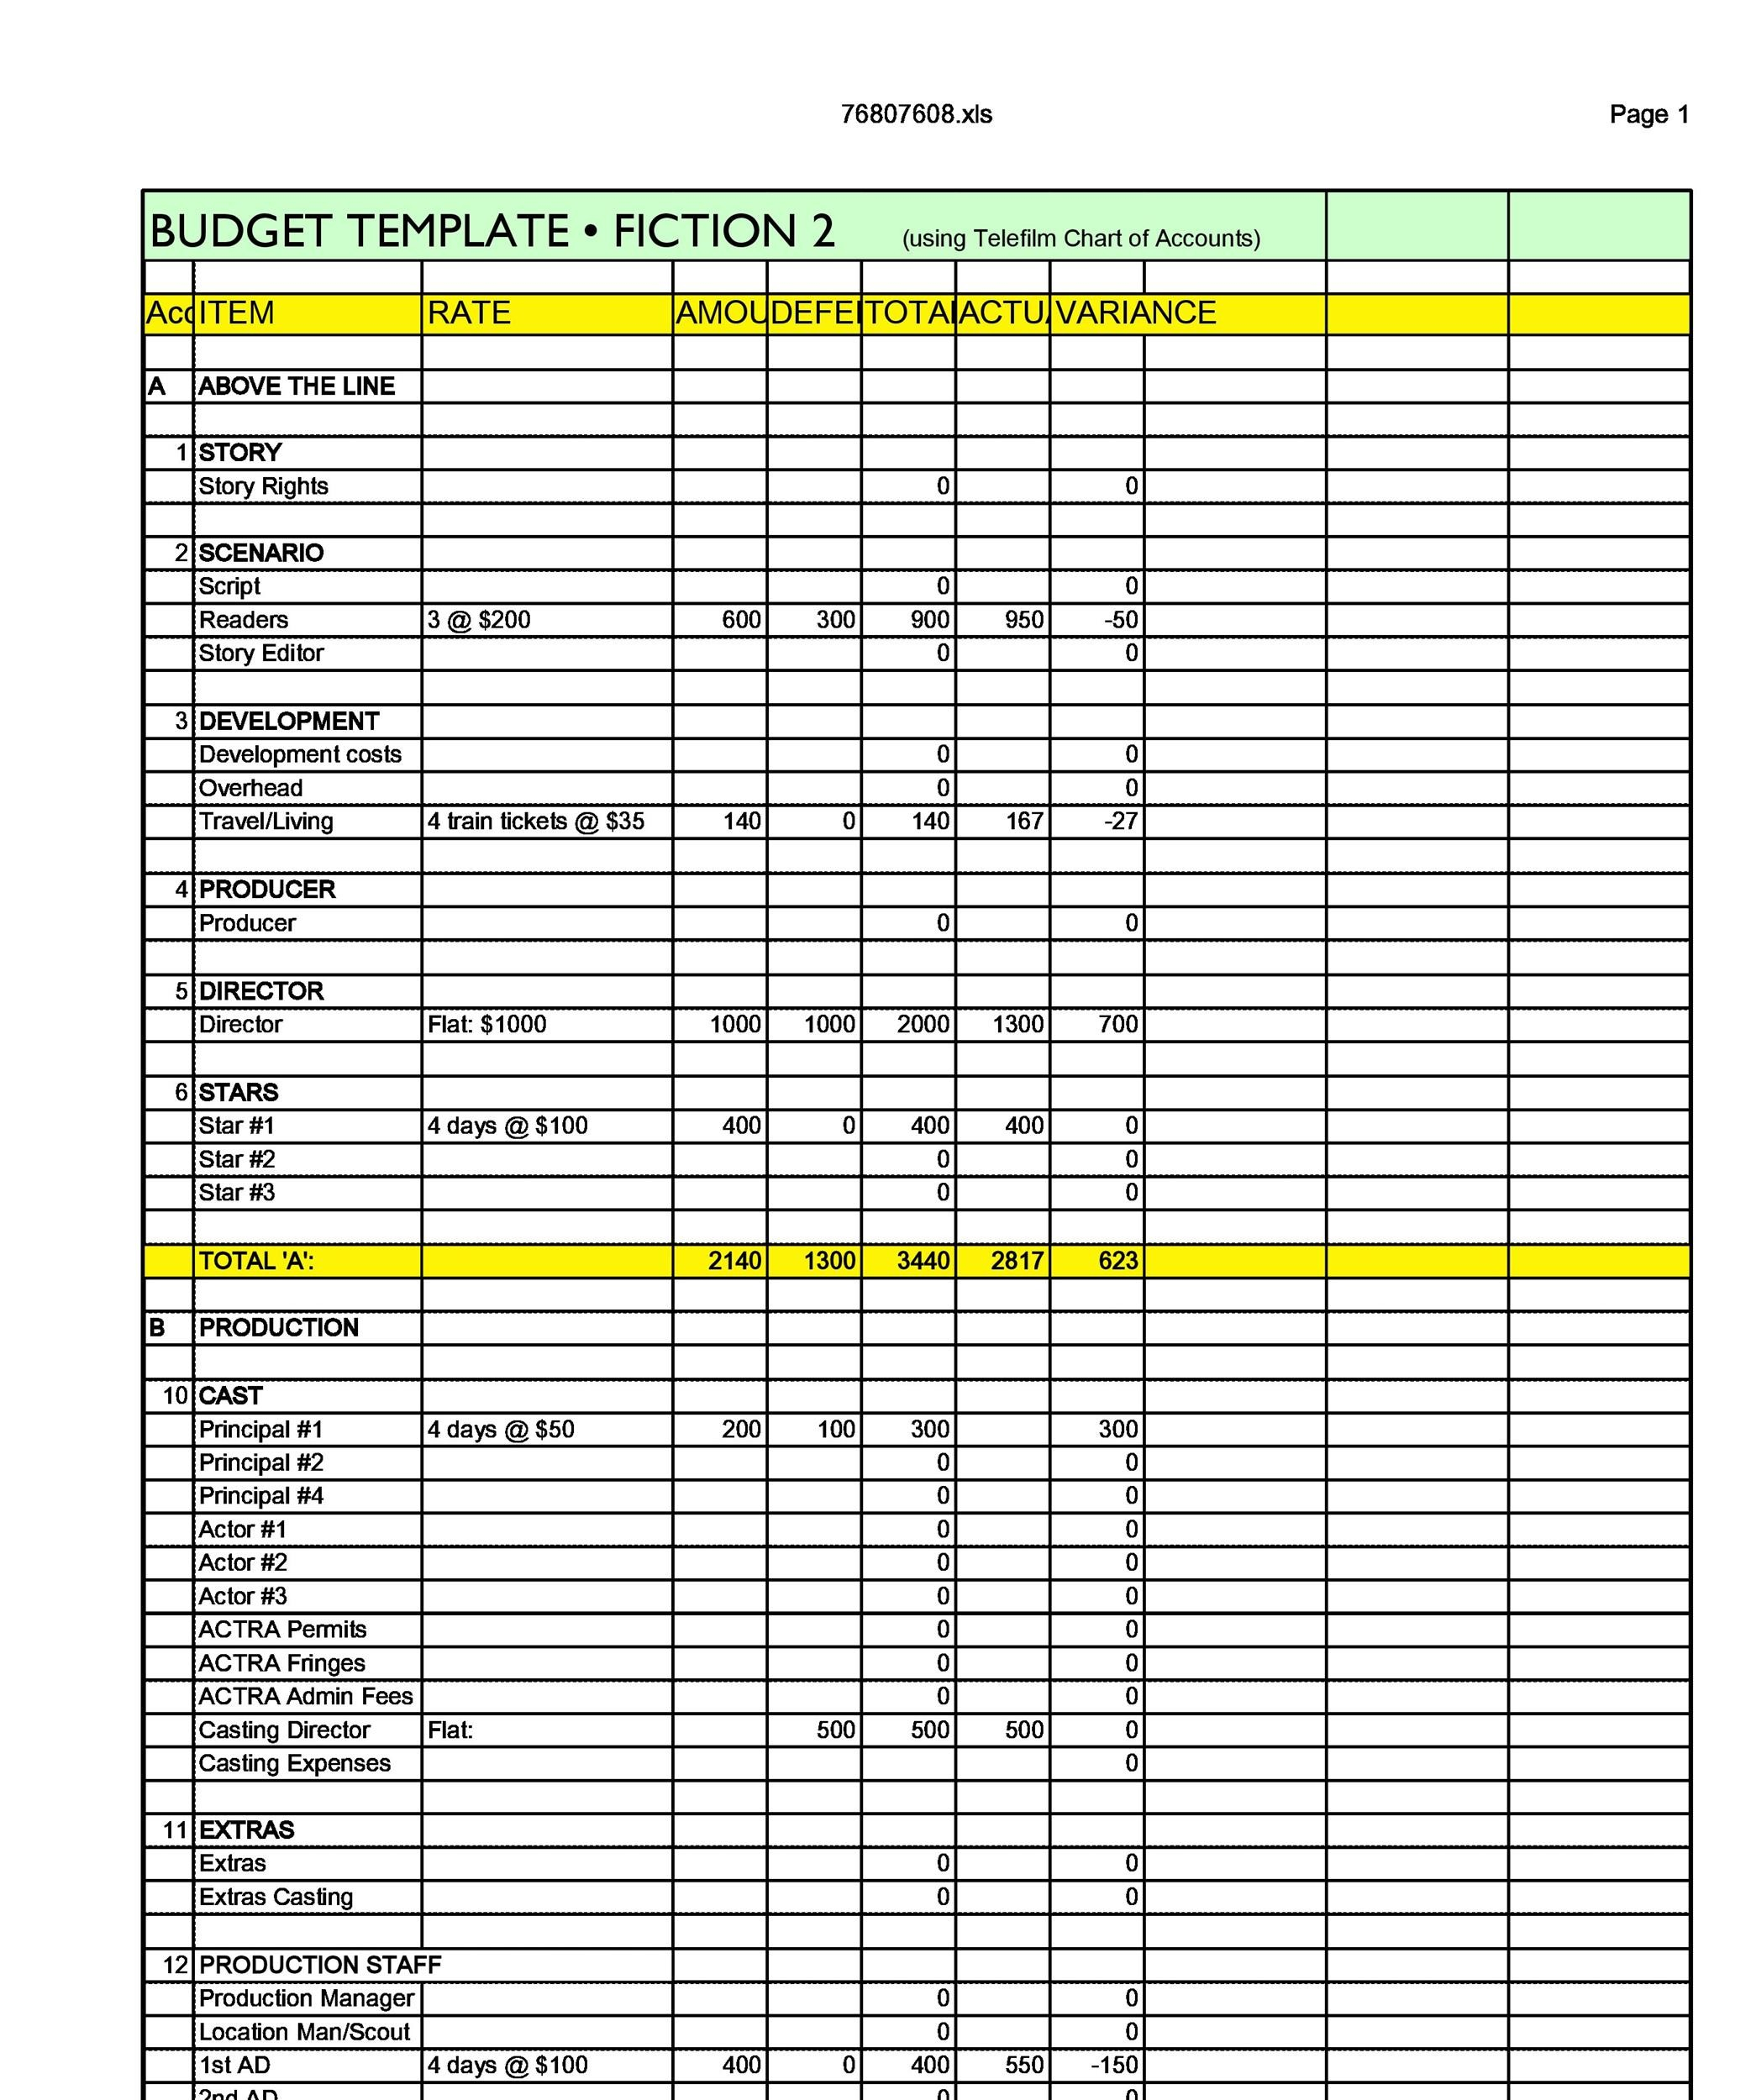 11 Free Film Budget Templates (Excel, Word) ᐅ TemplateLab Regarding Commercial Property Budget Template For Commercial Property Budget Template